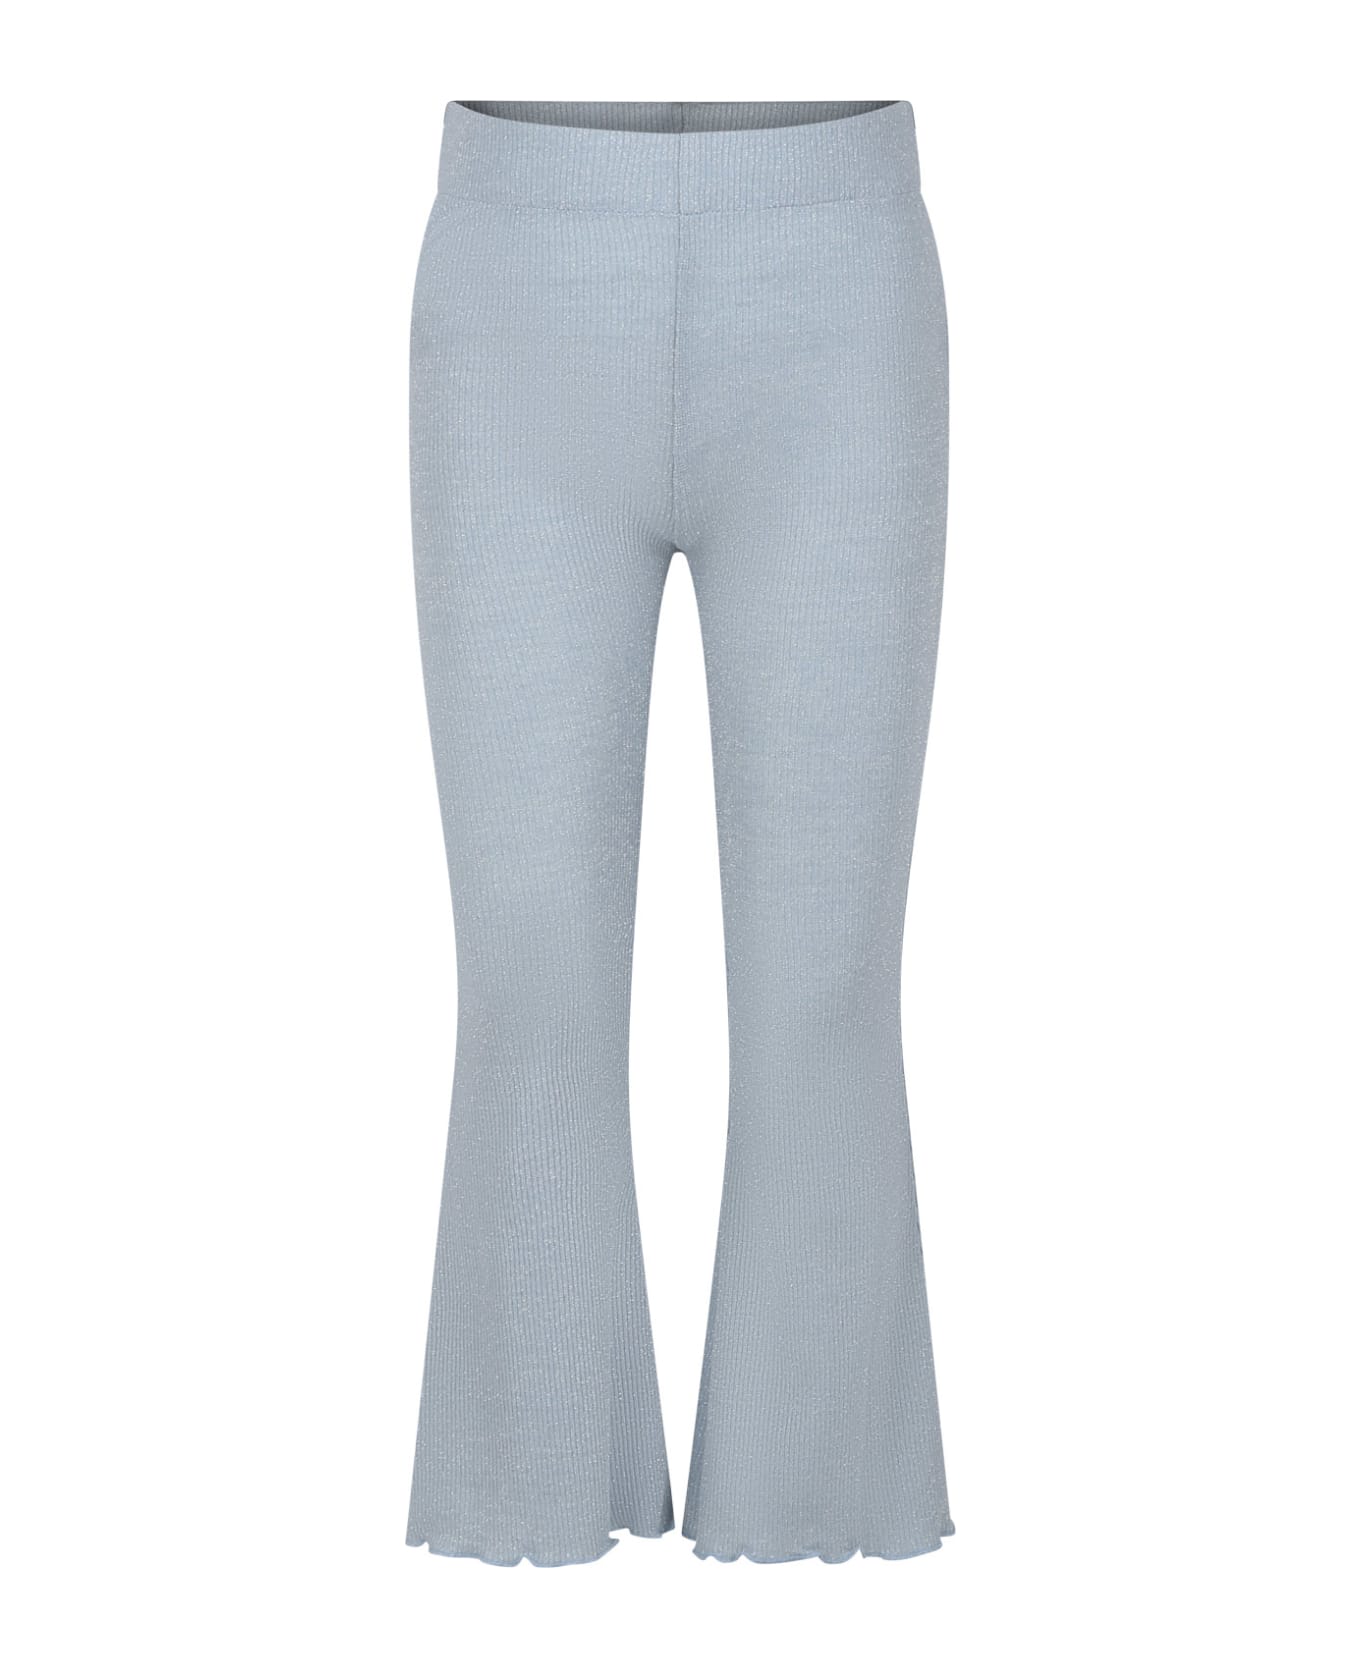 Caffe' d'Orzo Light Blue Trousers For Girl With Lurex - Light Blue